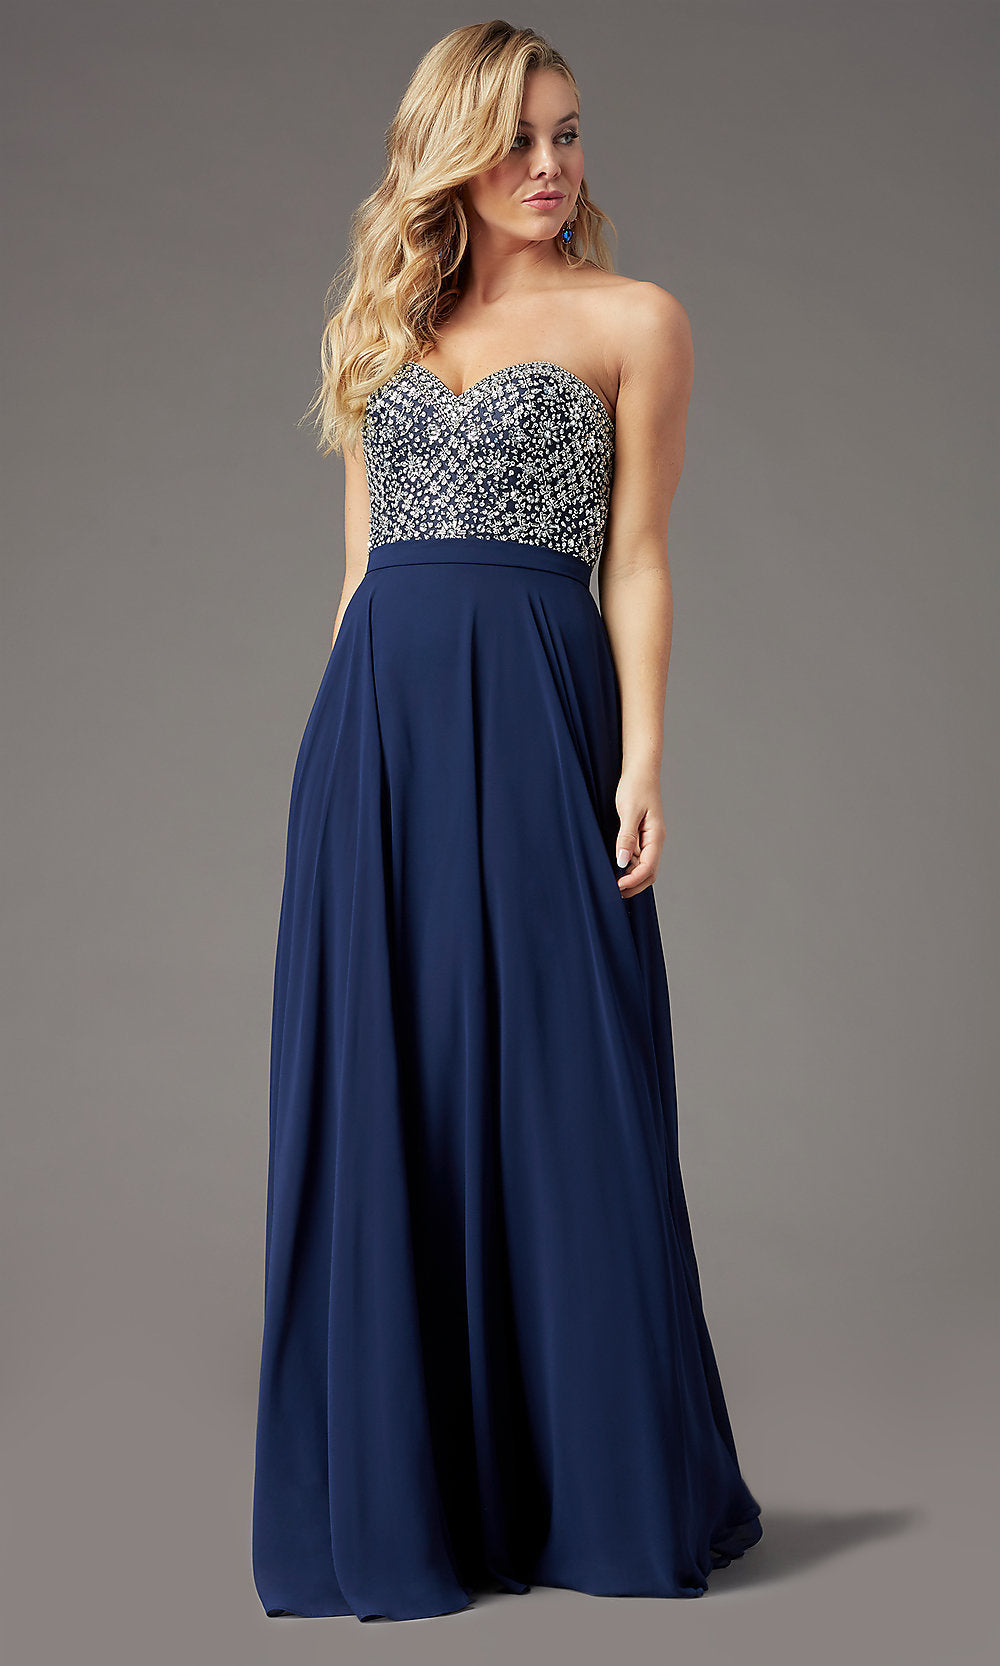 Embellished Sweetheart Long Prom Dress by PromGirl